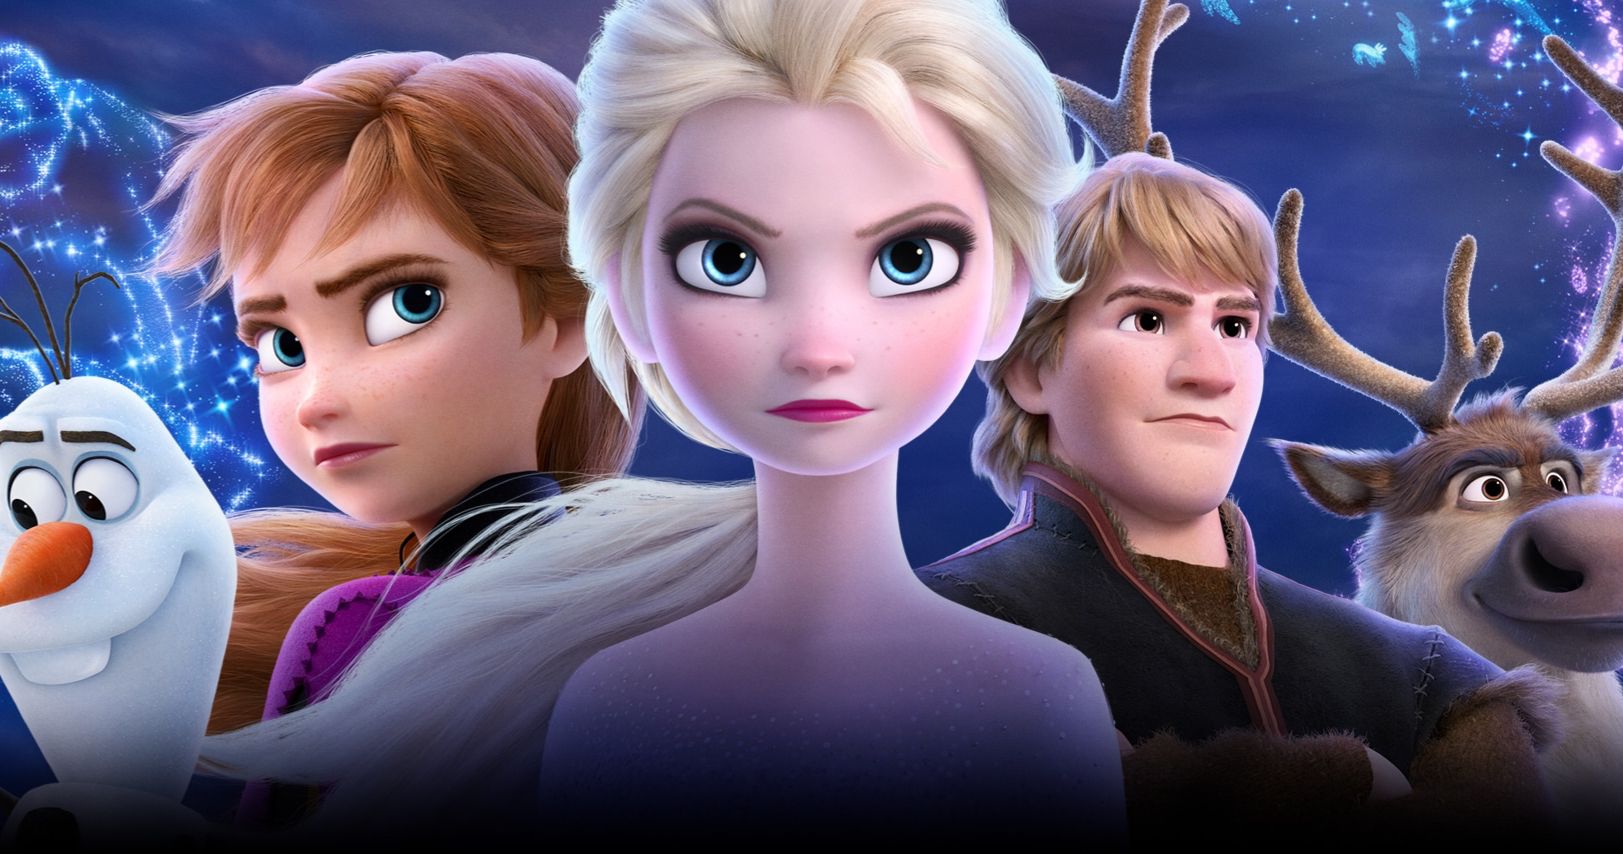 Frozen 2 Breaks Records at the Weekend Box Office with $127M Debut